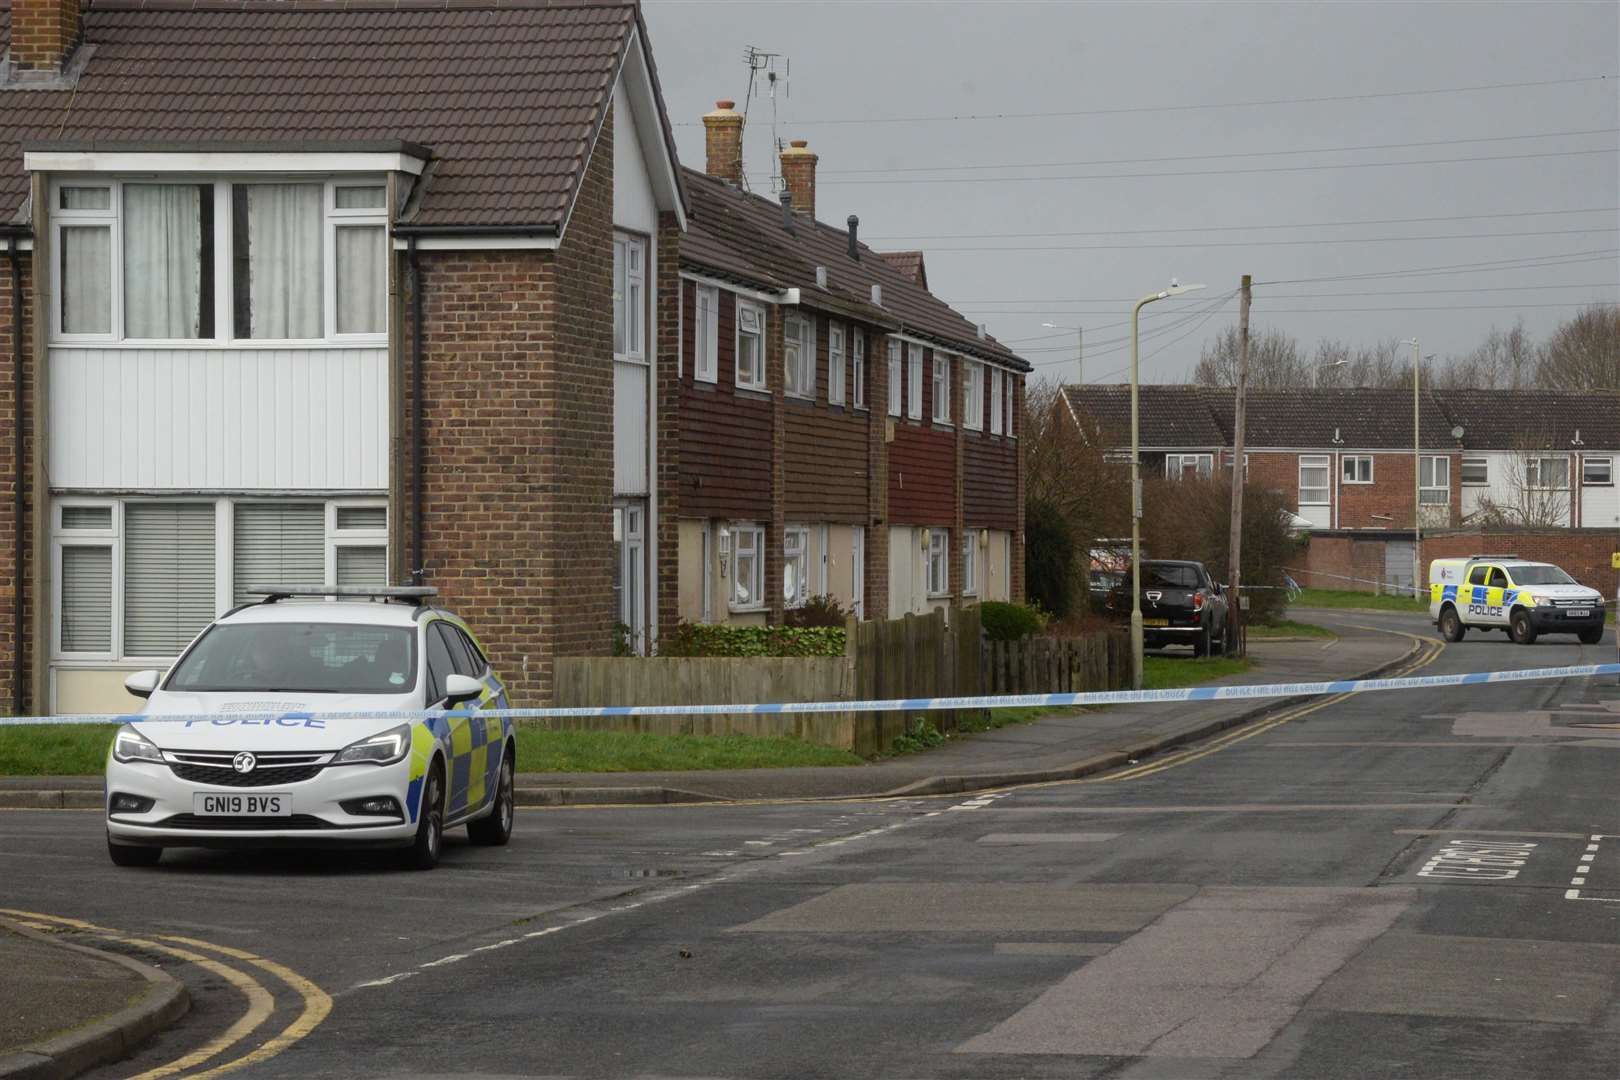 The scene remained cordoned off the day after the fatal attack